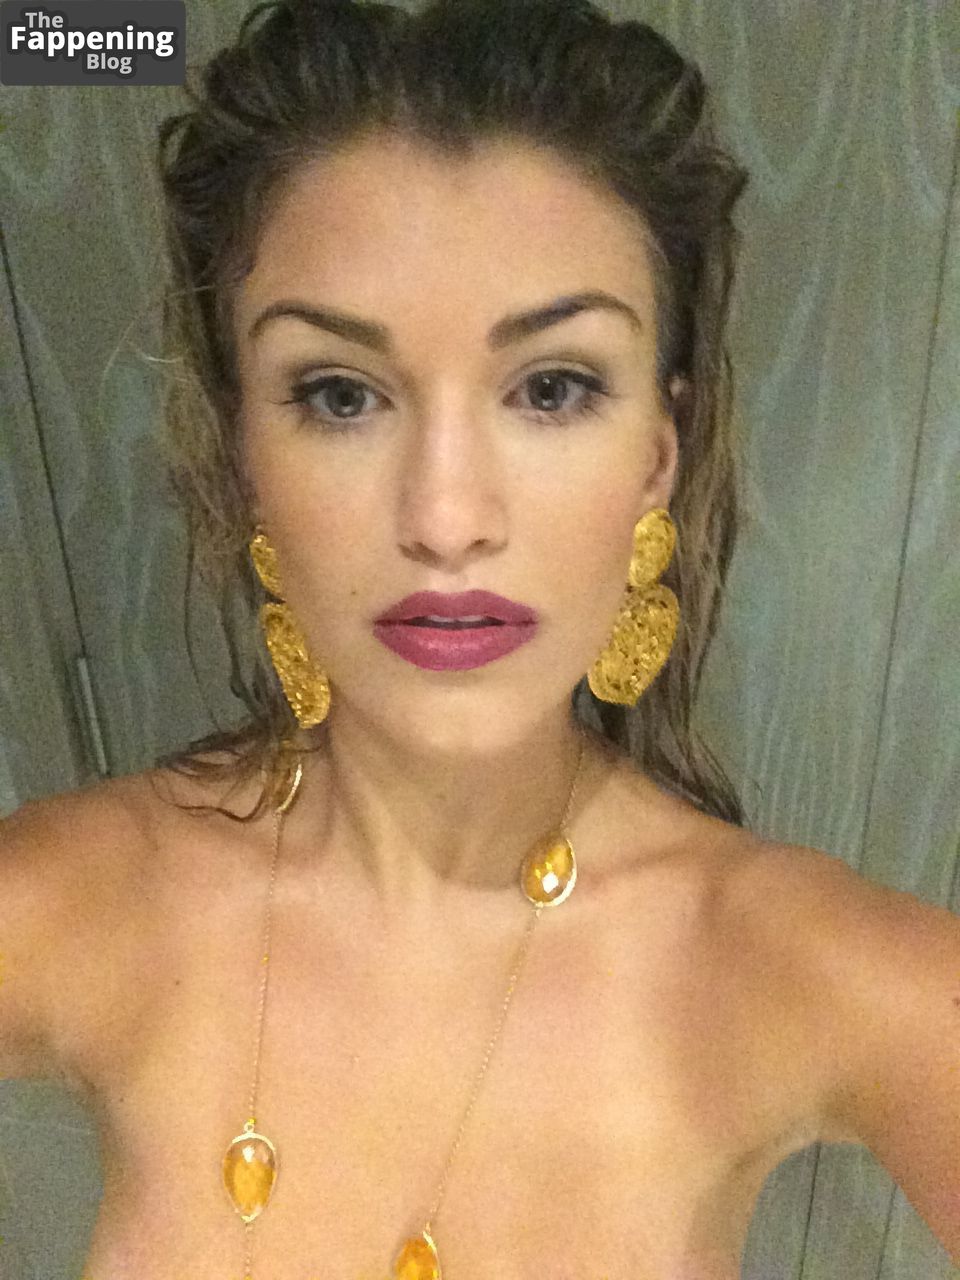 amy-willerton-the-fappening-323406-thefappeningblog.com_.jpg